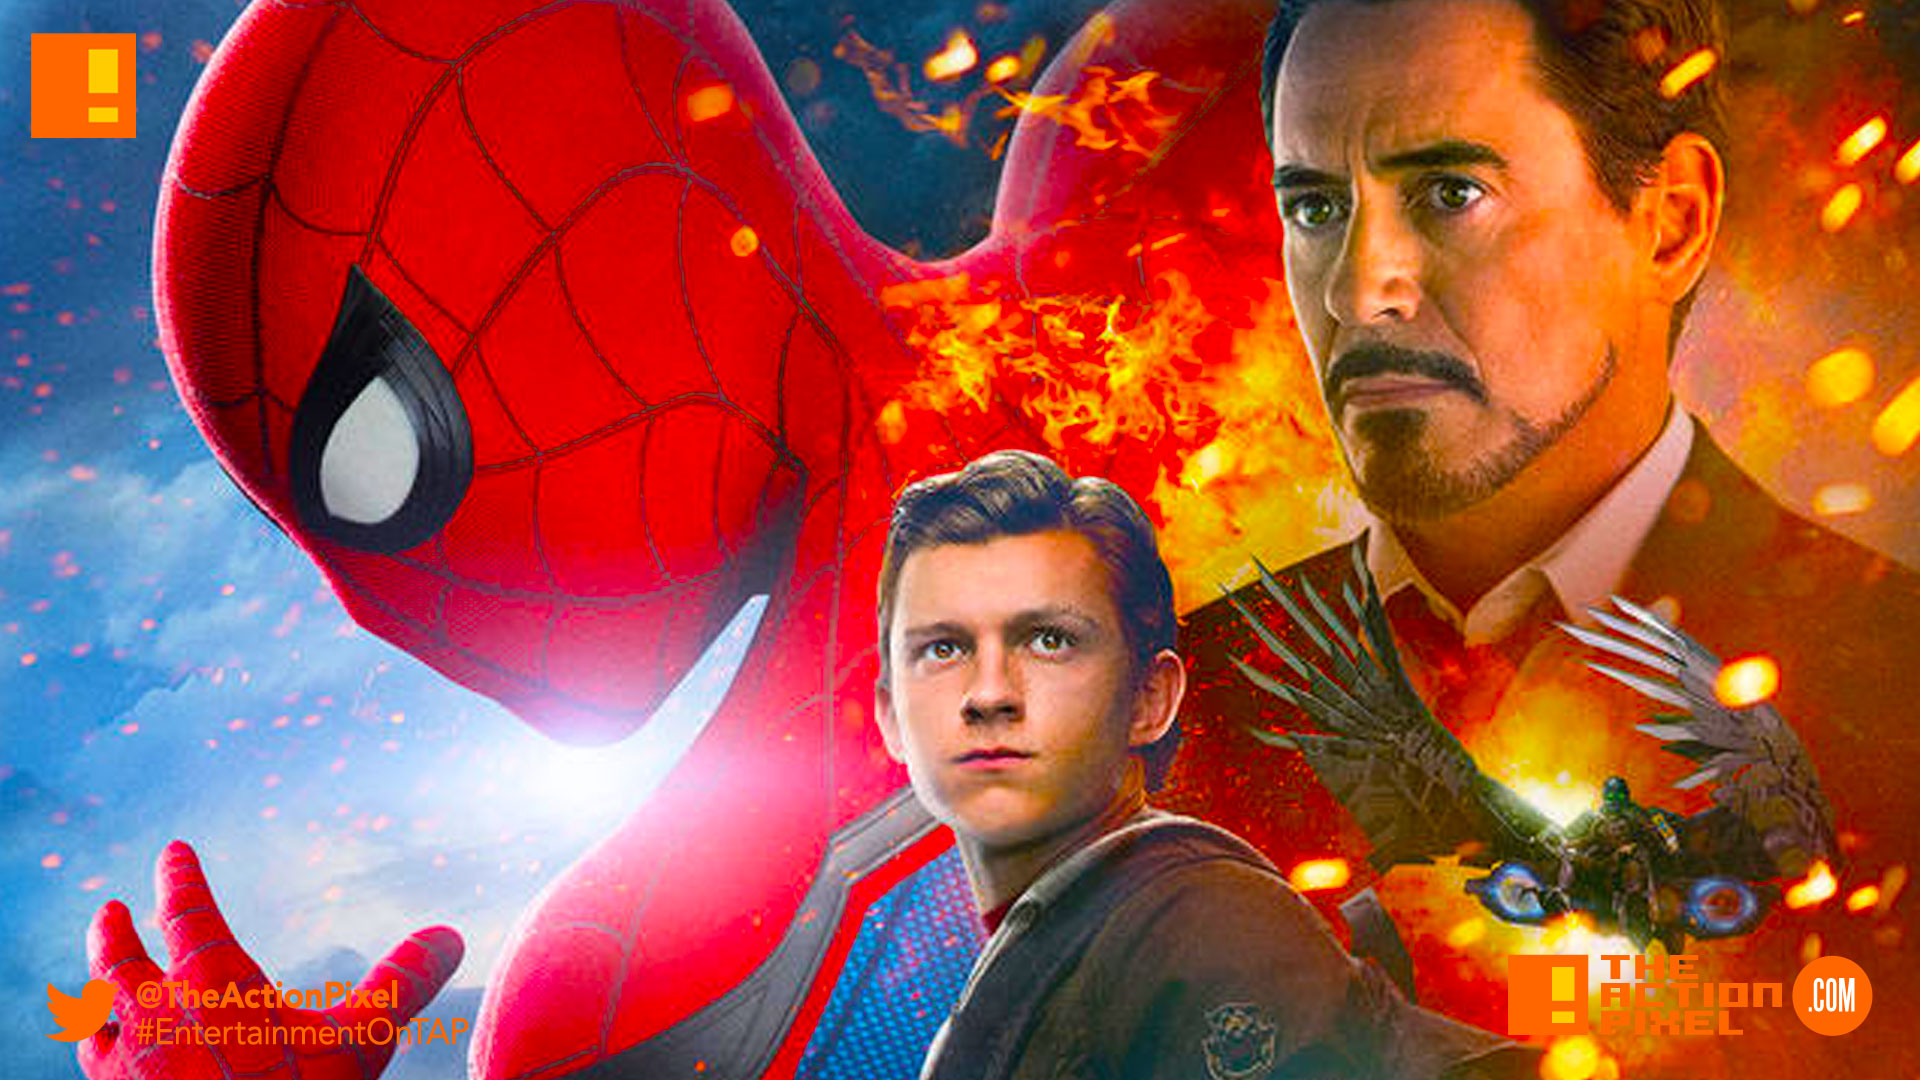 spiderman, poster spider-man: homecoming, spider-man, spiderman, homecoming, marvel, marvel comics, disney, marvel studios, sony, the action pixel, entertainment on tap, tom holland, images,vulture, trailer, trailer 3,poster,iron man, robert downey jr., michael keaton,